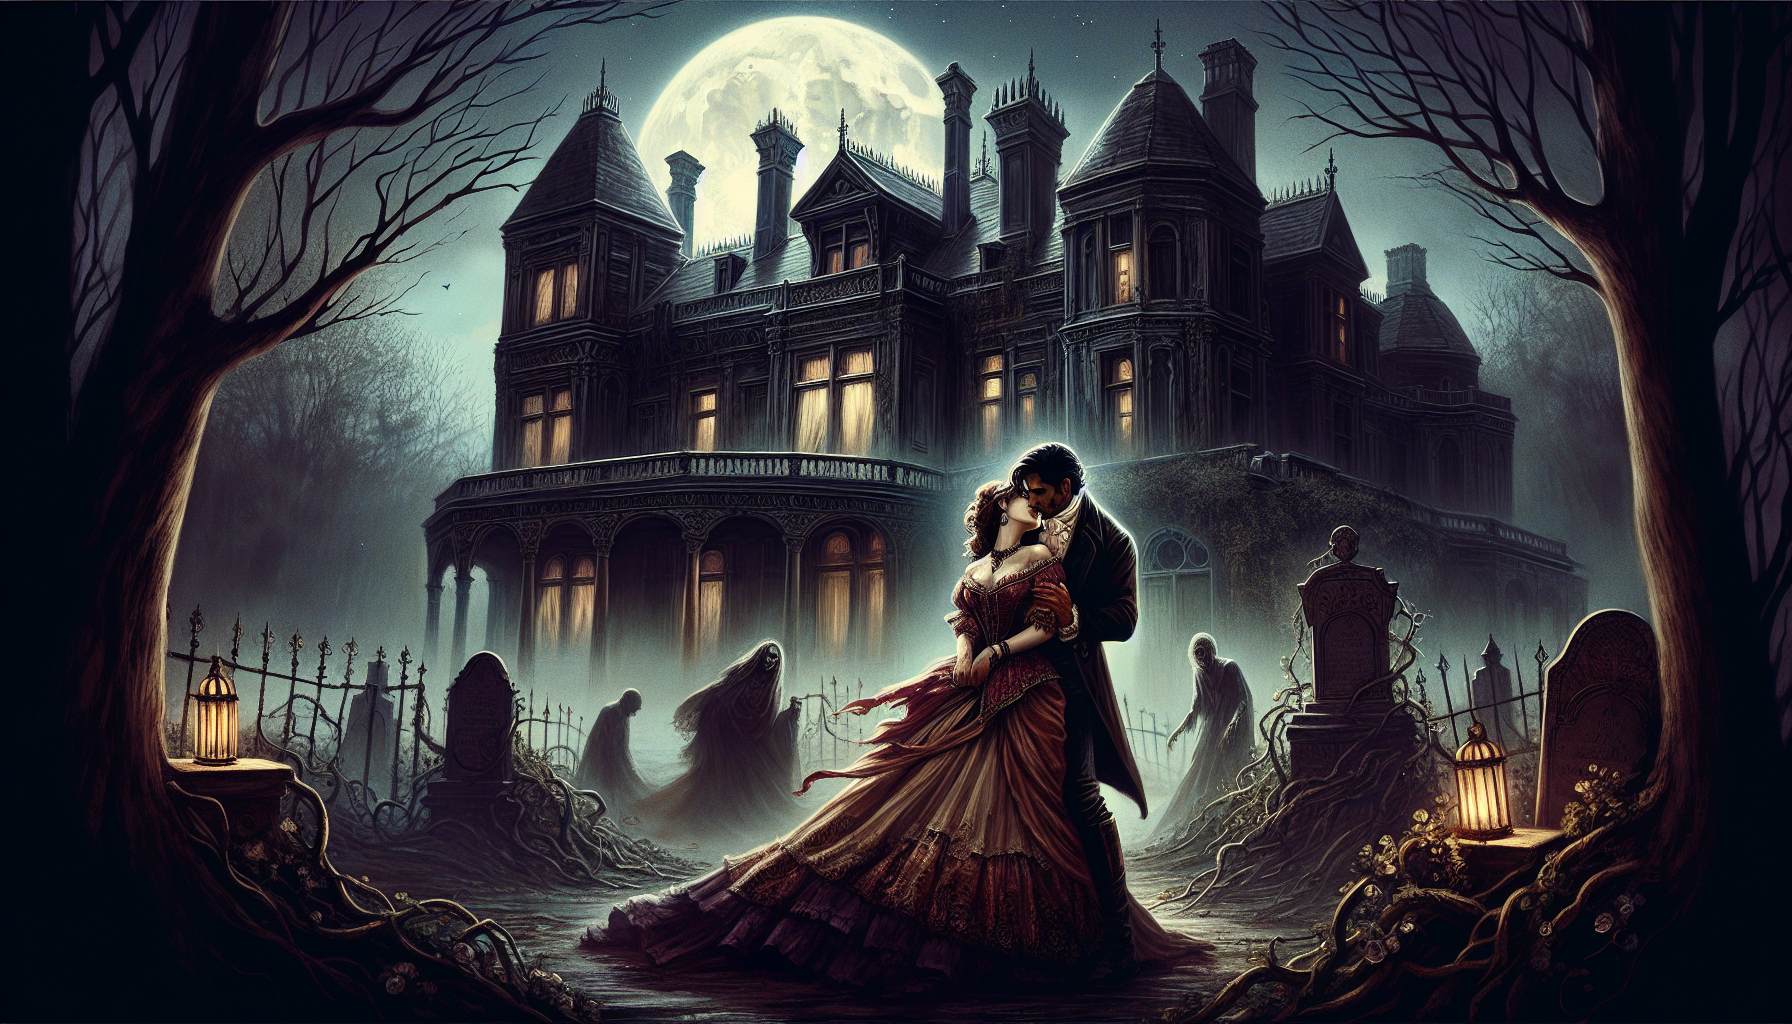 Illustration of gothic horror setting from Anne Rice's novels